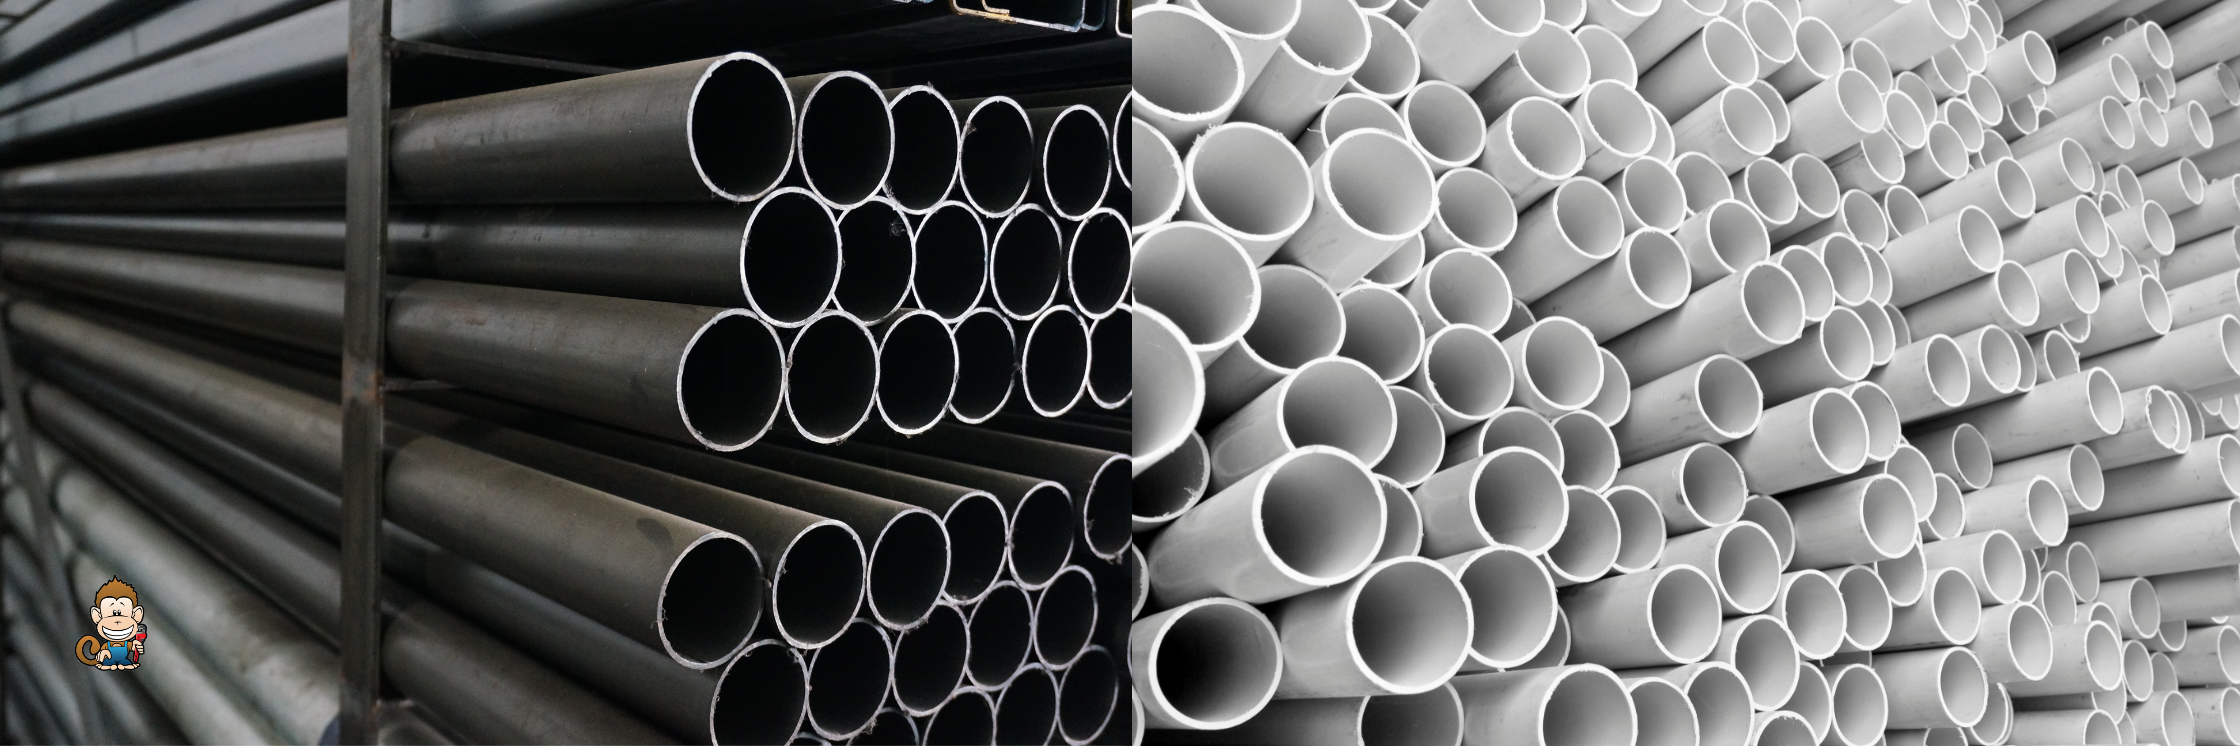 ABS vs. PVC Comparison: The Battle Between Two Plastic Pipes